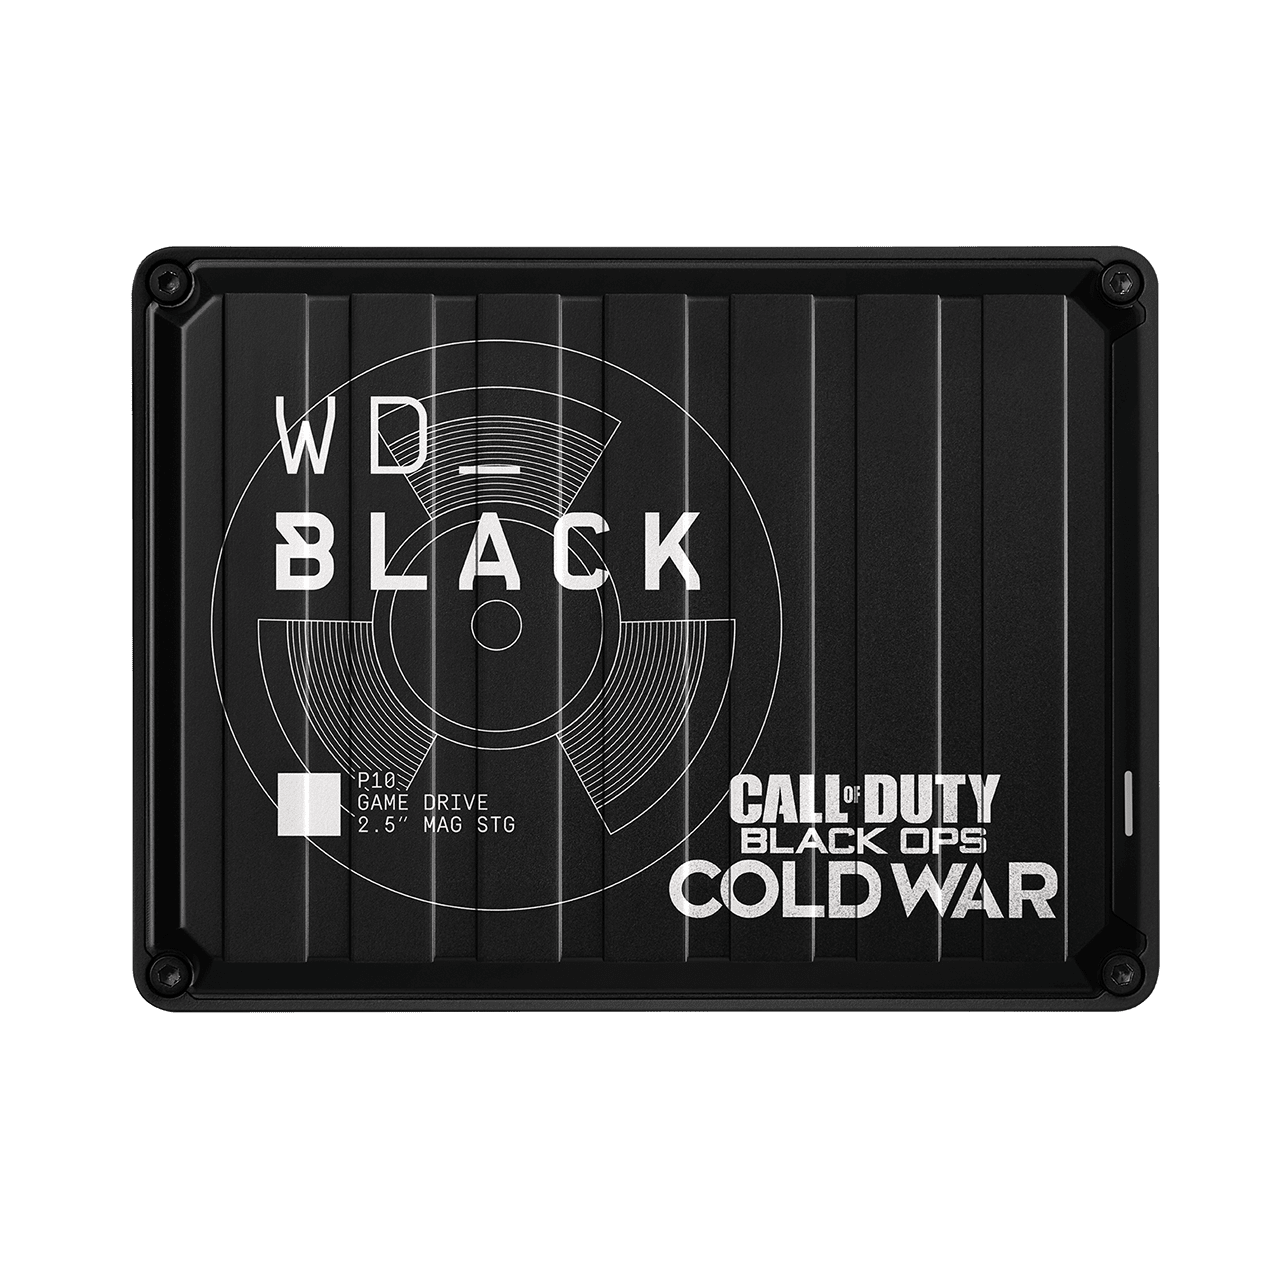 wd-black-p10-game-drive-call-of-duty-edition-usb-3-2-hdd.png.thumb.1280.1280.png